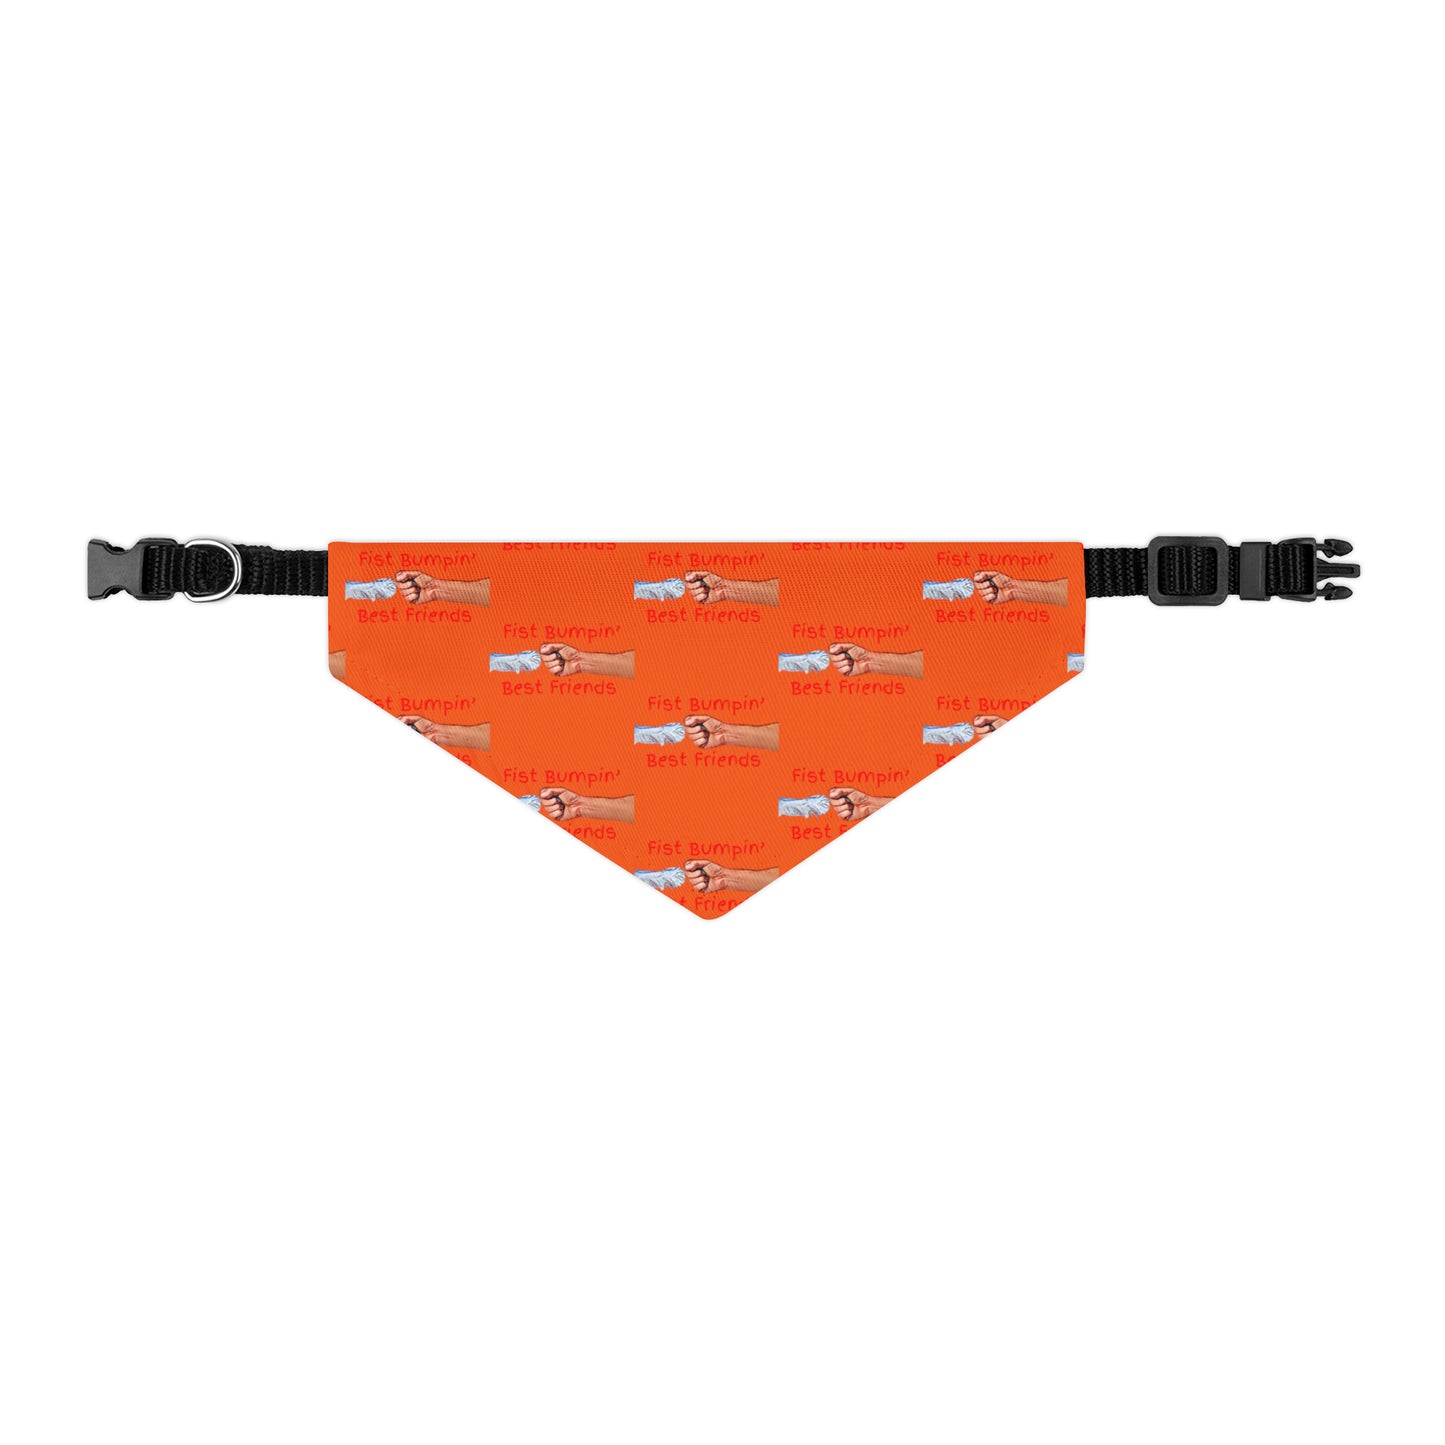 Fist Bumpin’ Best Friends Opie’s Cavalier King Charles Spaniel Paw Pet Bandana Collar Orange with KC Red lettering.